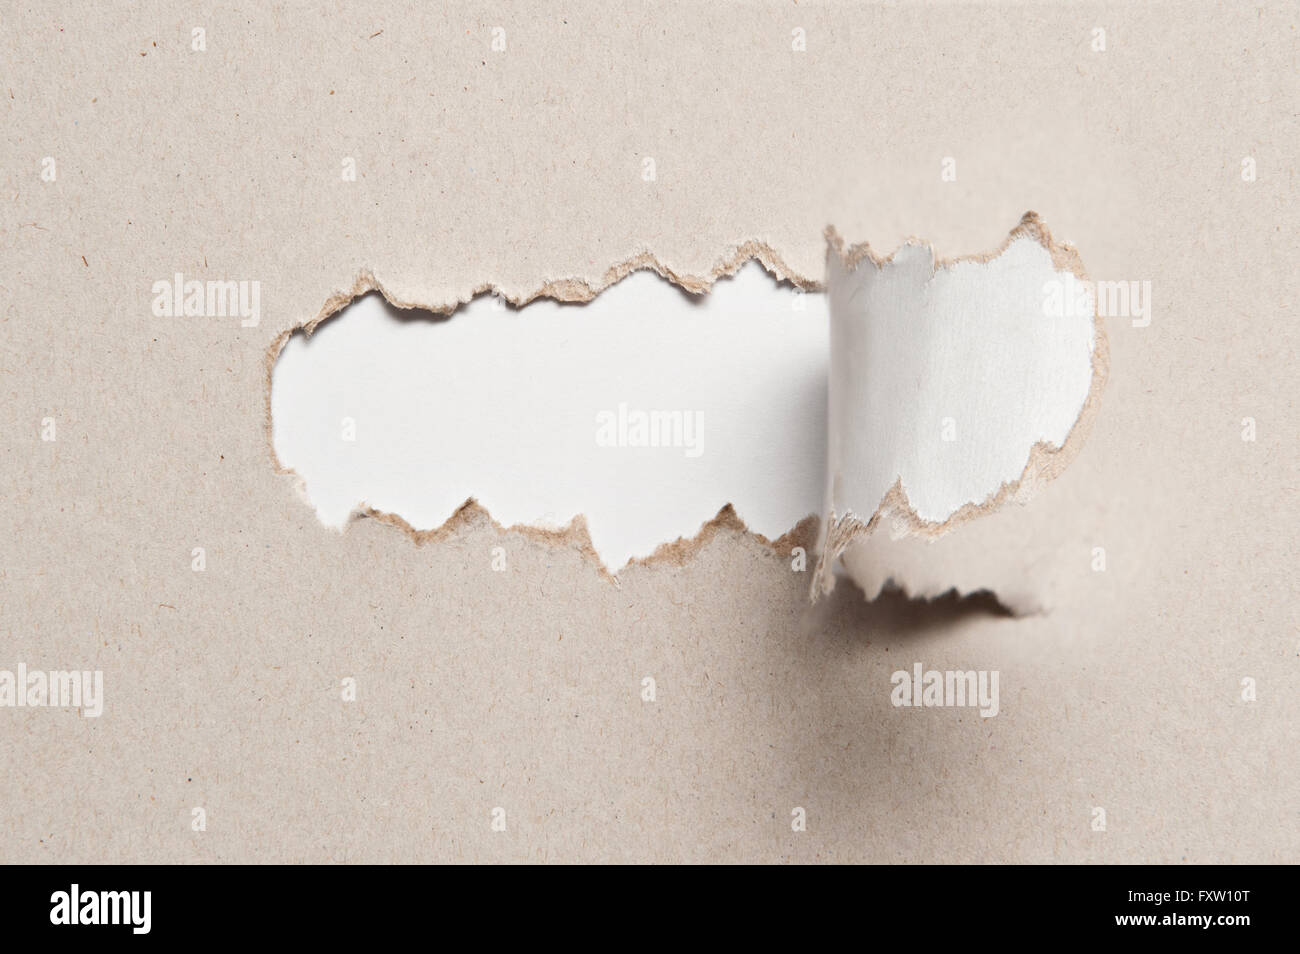 paper texture with torn half piece of middle and place for text Stock Photo